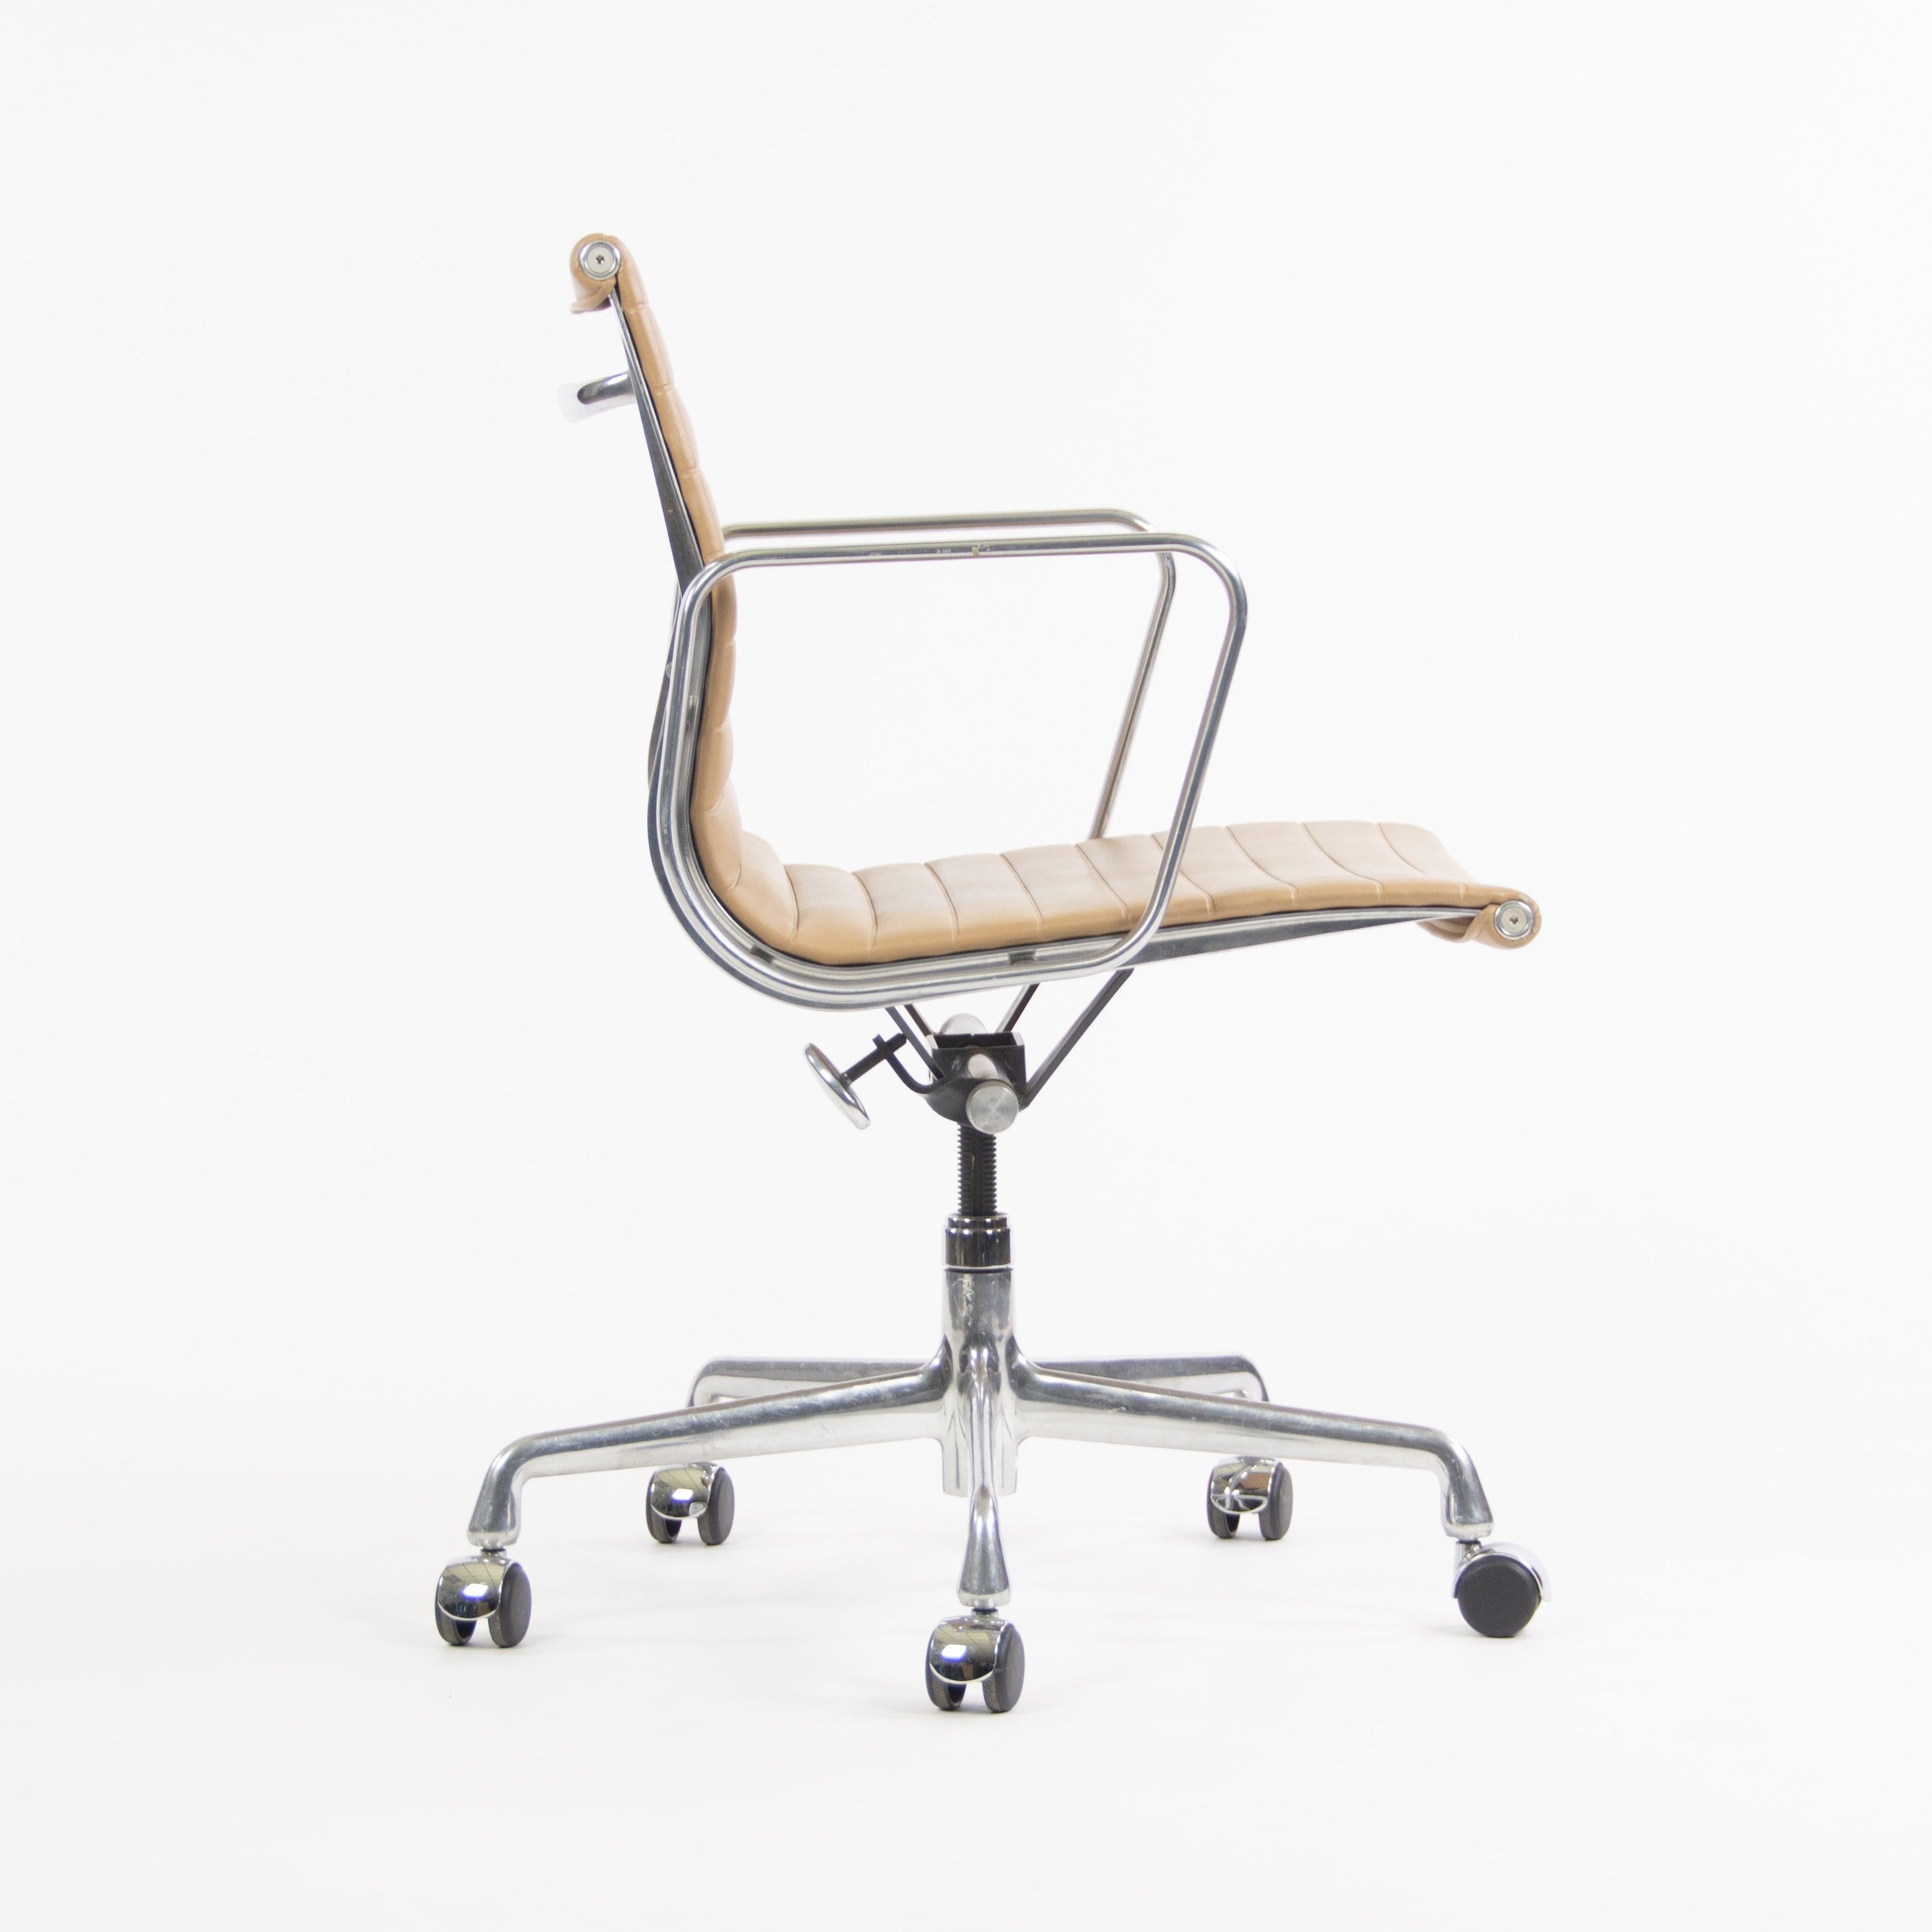 2008 Herman Miller Eames Aluminum Group Management Desk Chair in Tan Naugahyde In Good Condition For Sale In Philadelphia, PA